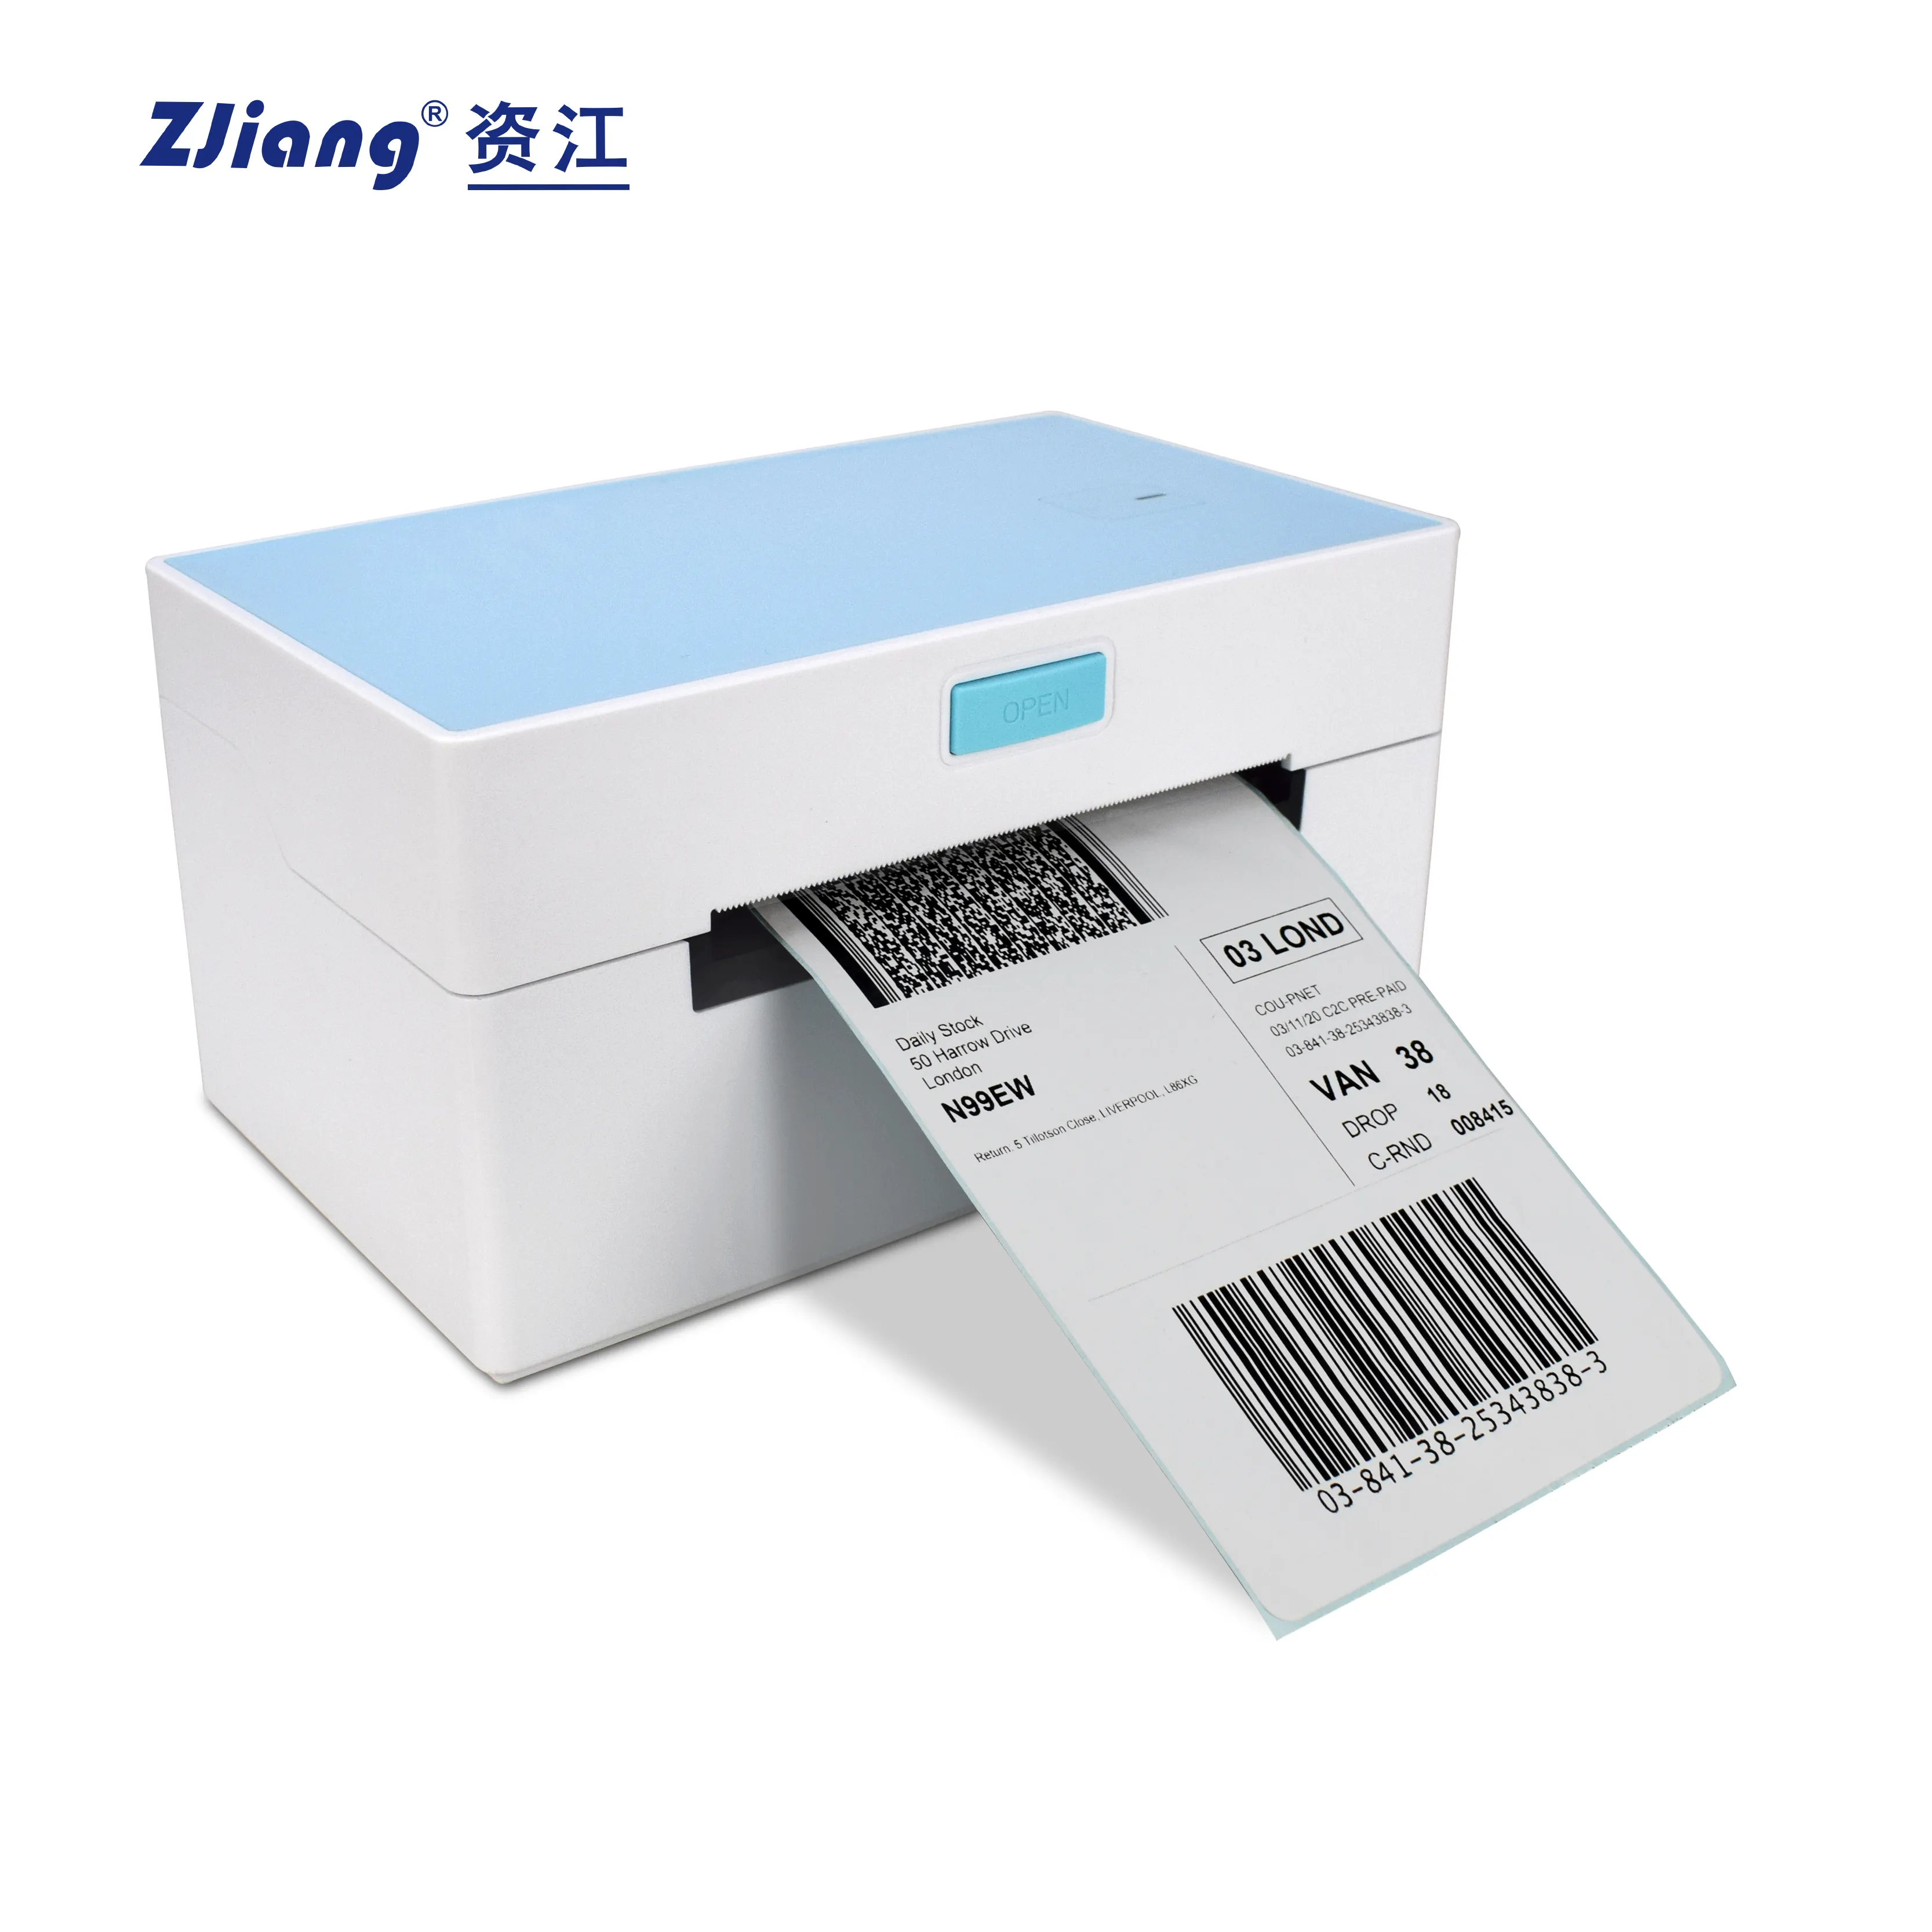 Wireless 4*6 Shipping Label Printer, Compatible with Android&iPhone and Windows,mac Widely Used for Ebay, Amazon Shopify